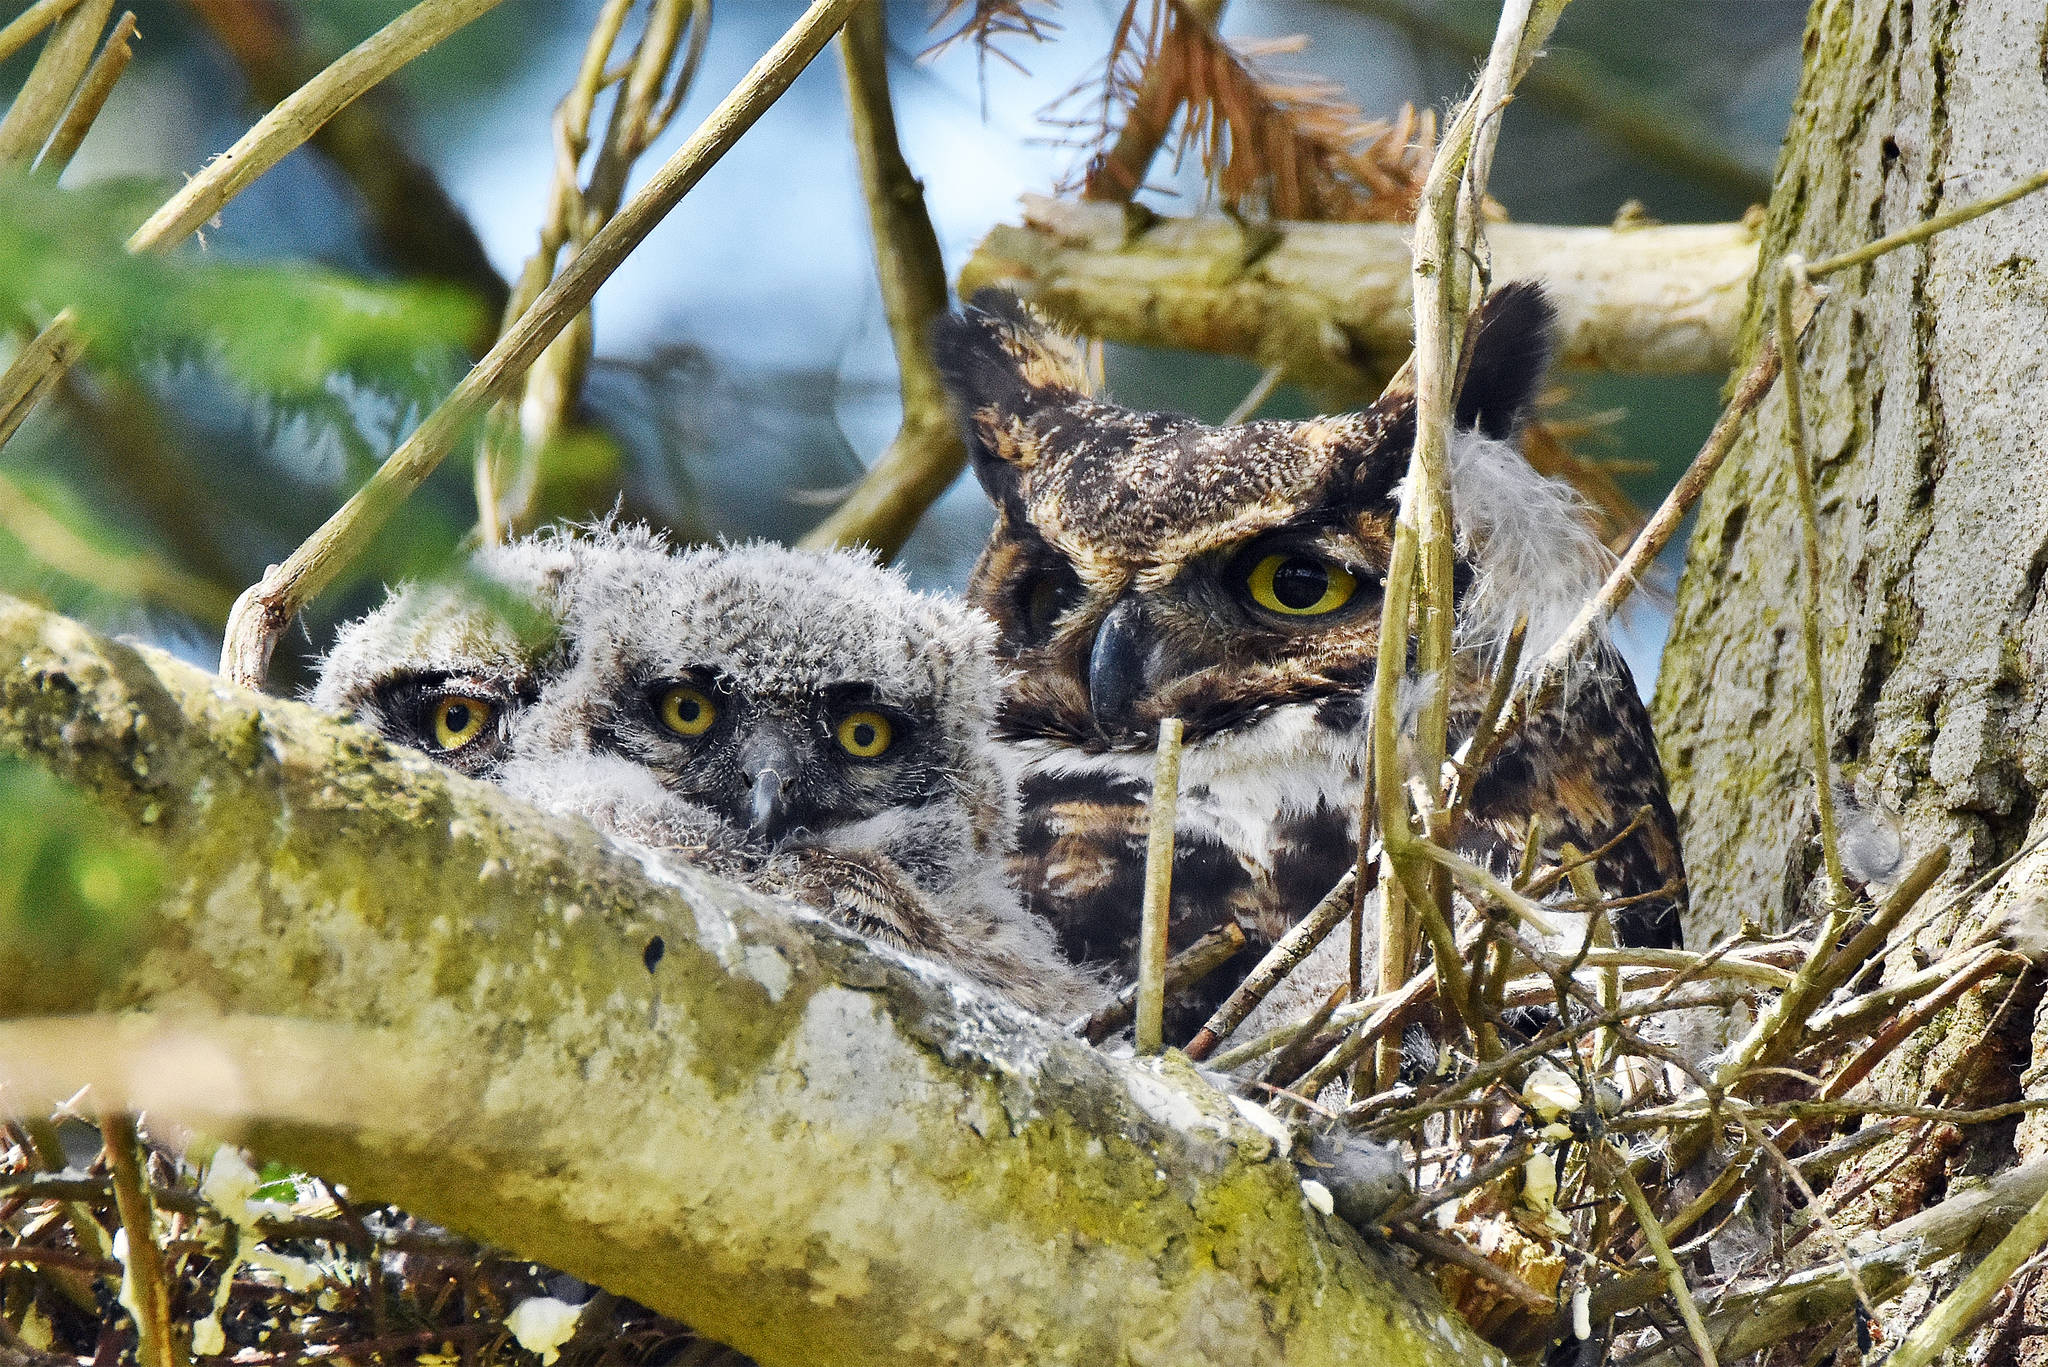 Photo by Cara Hefflinger
After Coupeville resident Geri Nelson saw these two Great Horned owlets and their mother, she posted to social media to see if there was any local photography interest. Cara Hefflinger came to the tree, camera in hand.